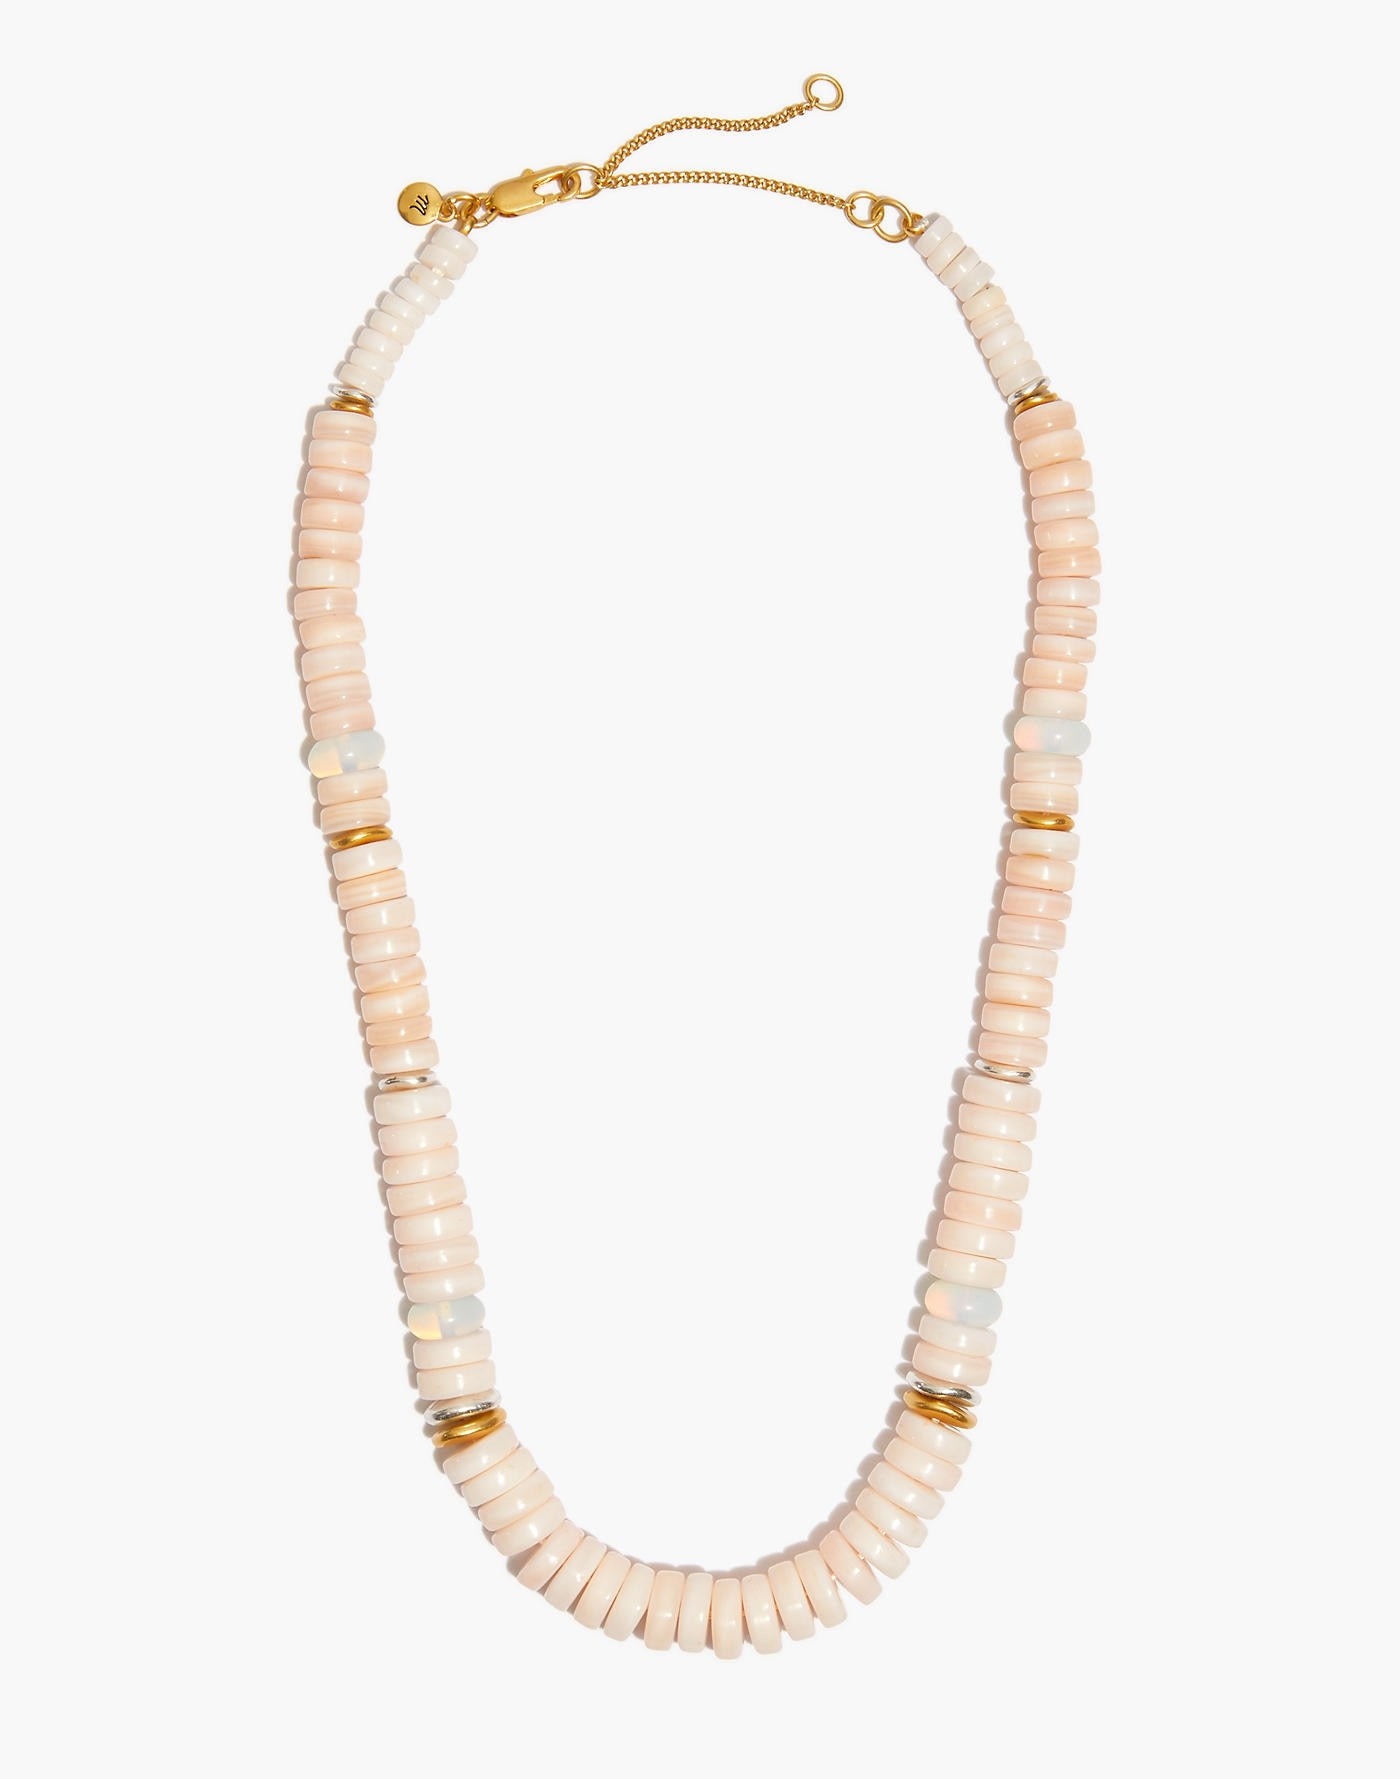 The beaded necklace with a selection of light pink and gold beads